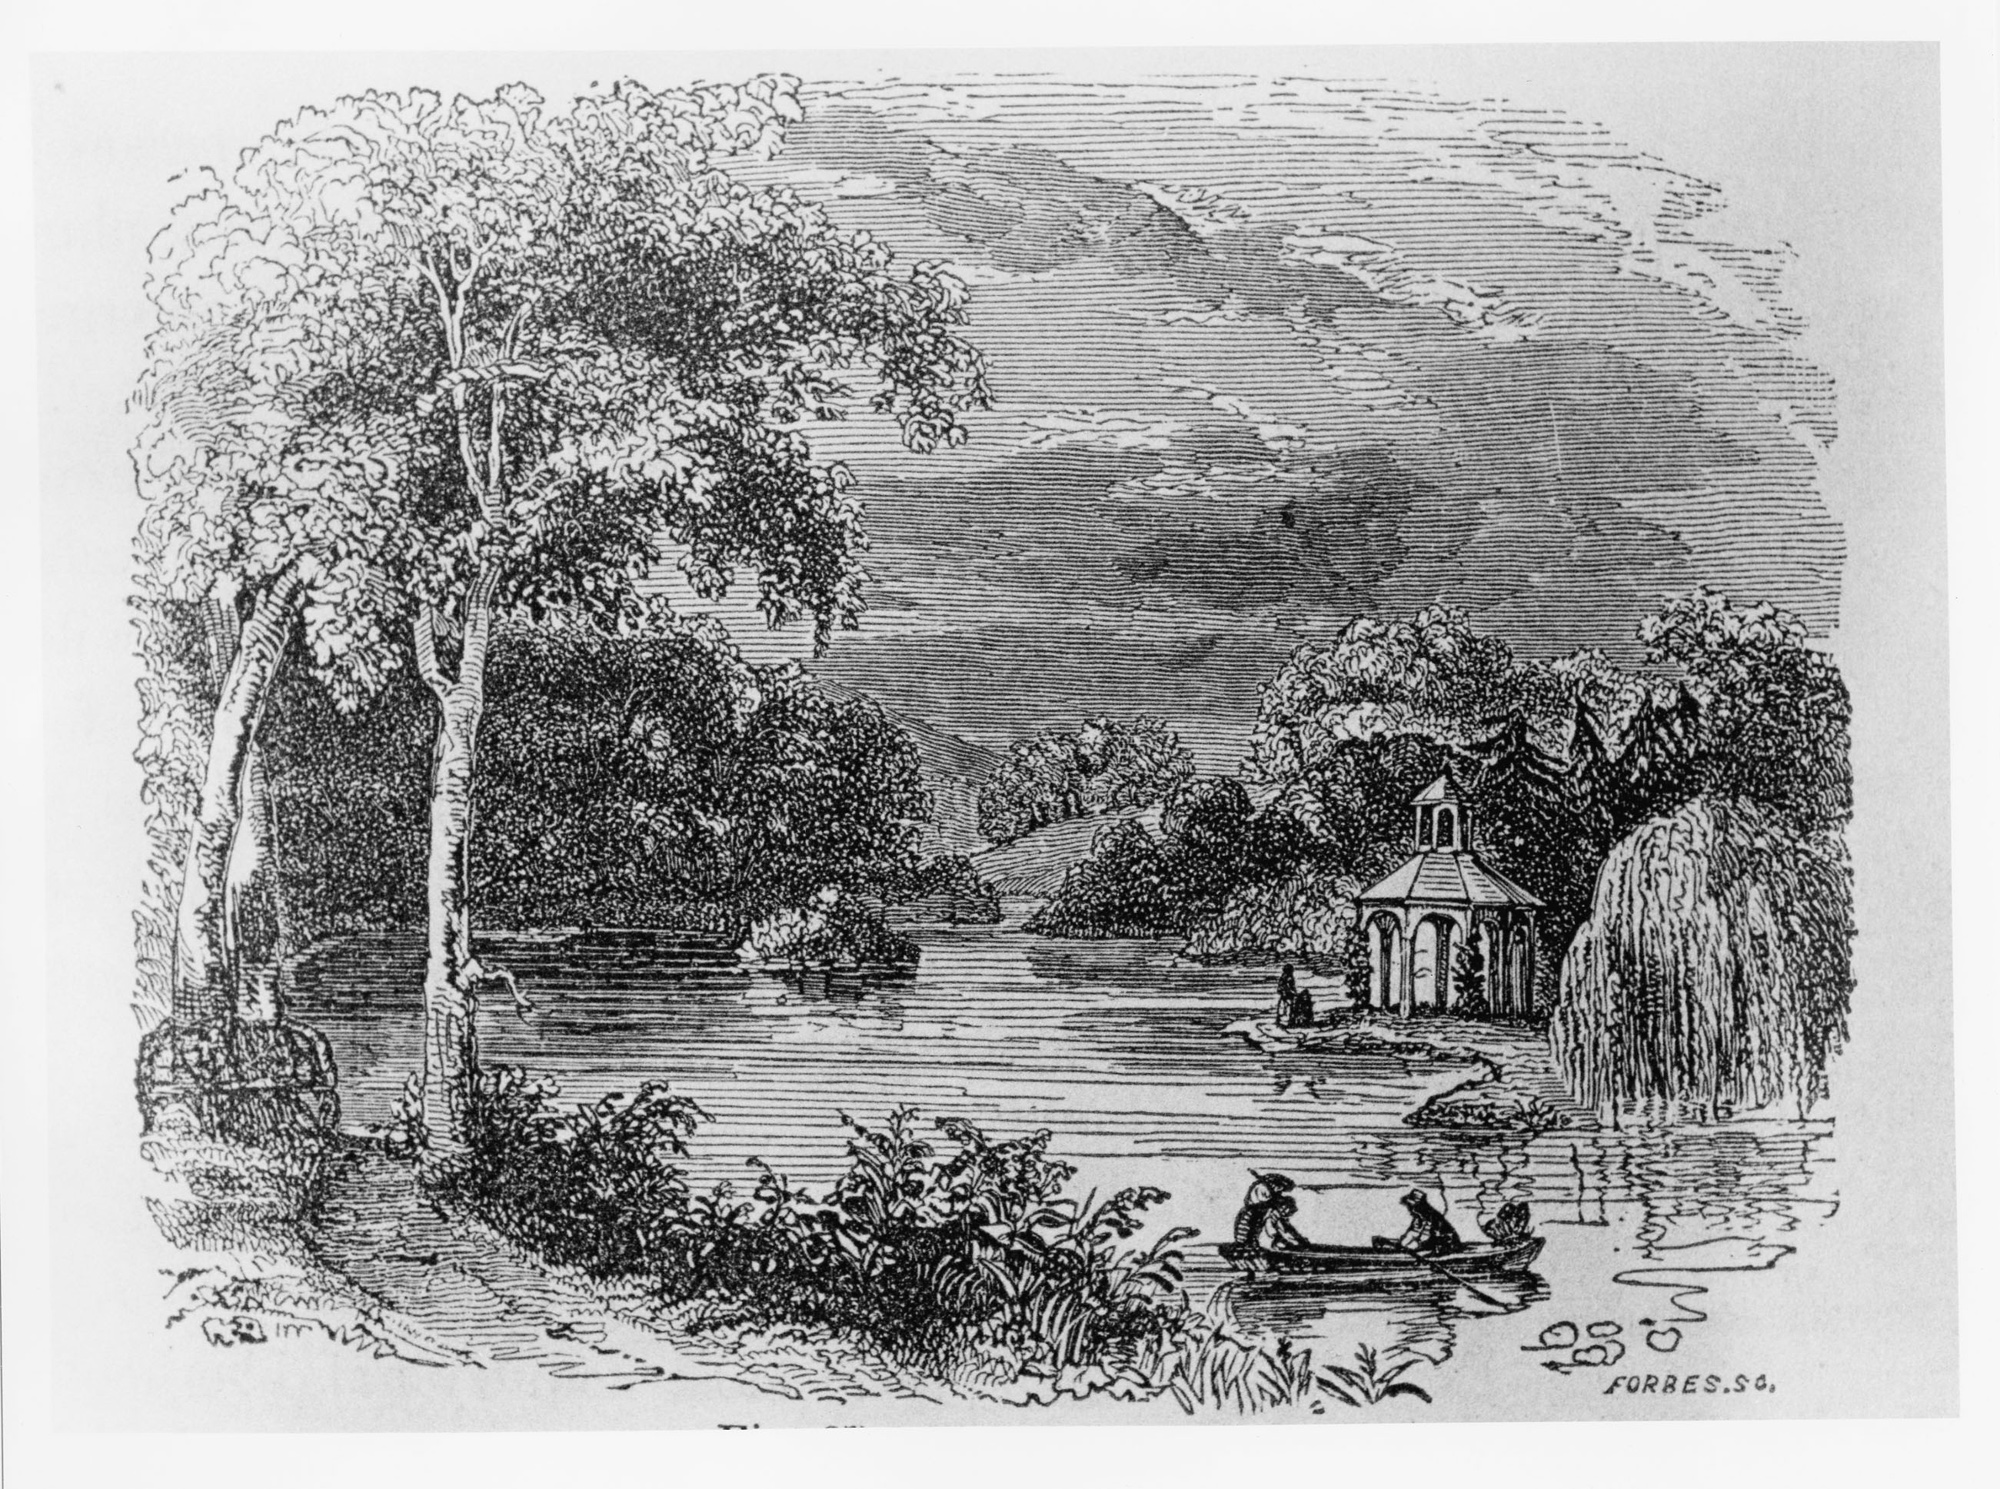 Fig. 11, Anonymous, "The Lake," Montgomery Place, in A. J. Downing, ed., Horticulturist 2, no. 4 (October 1847): 158, fig. 27.